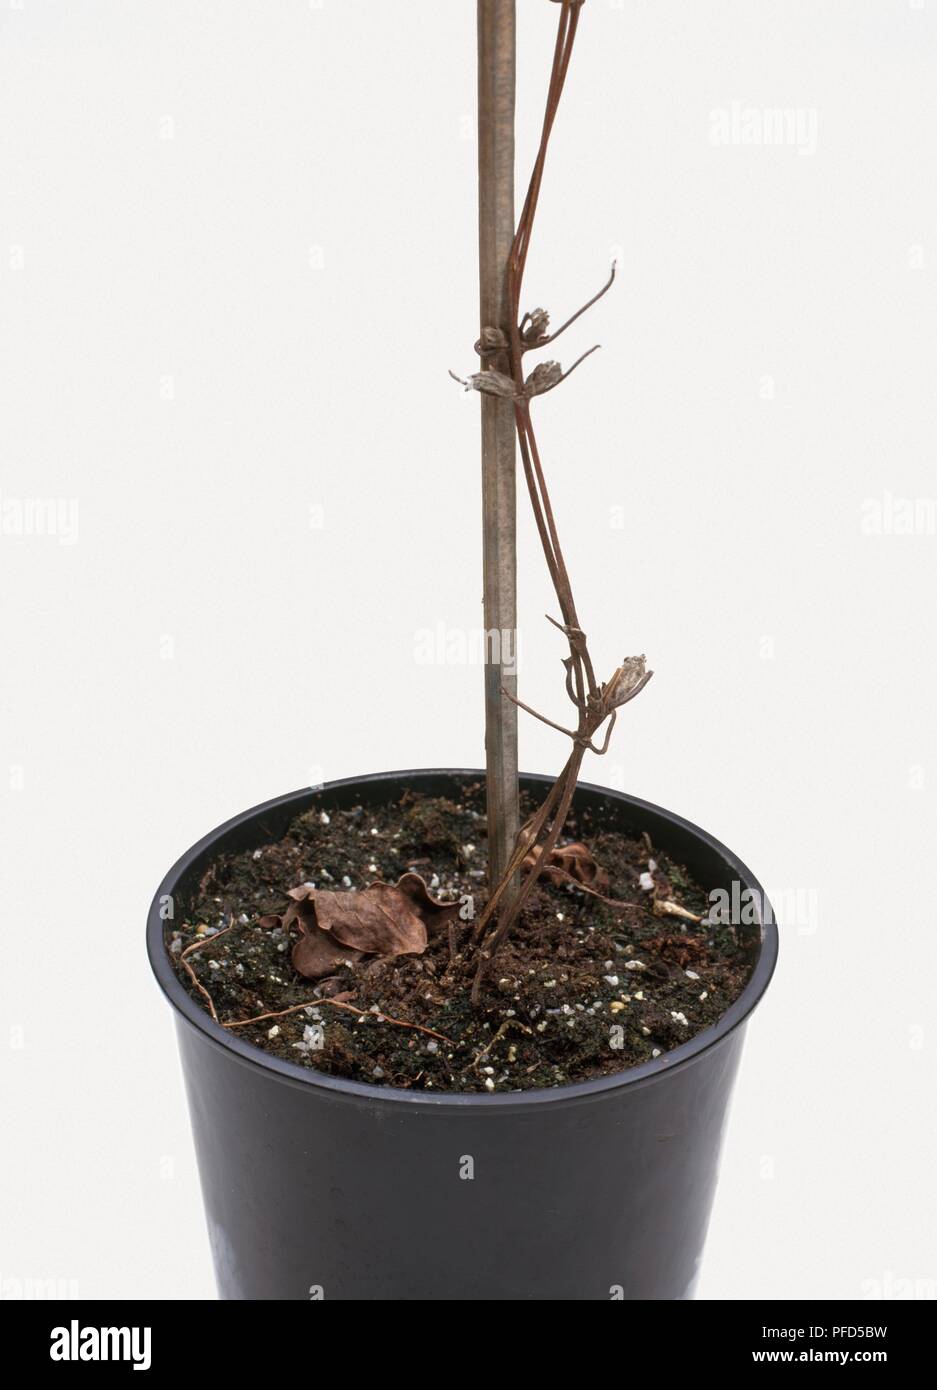 Lonicera in plant pot showing thin stem with damaged buds Stock Photo